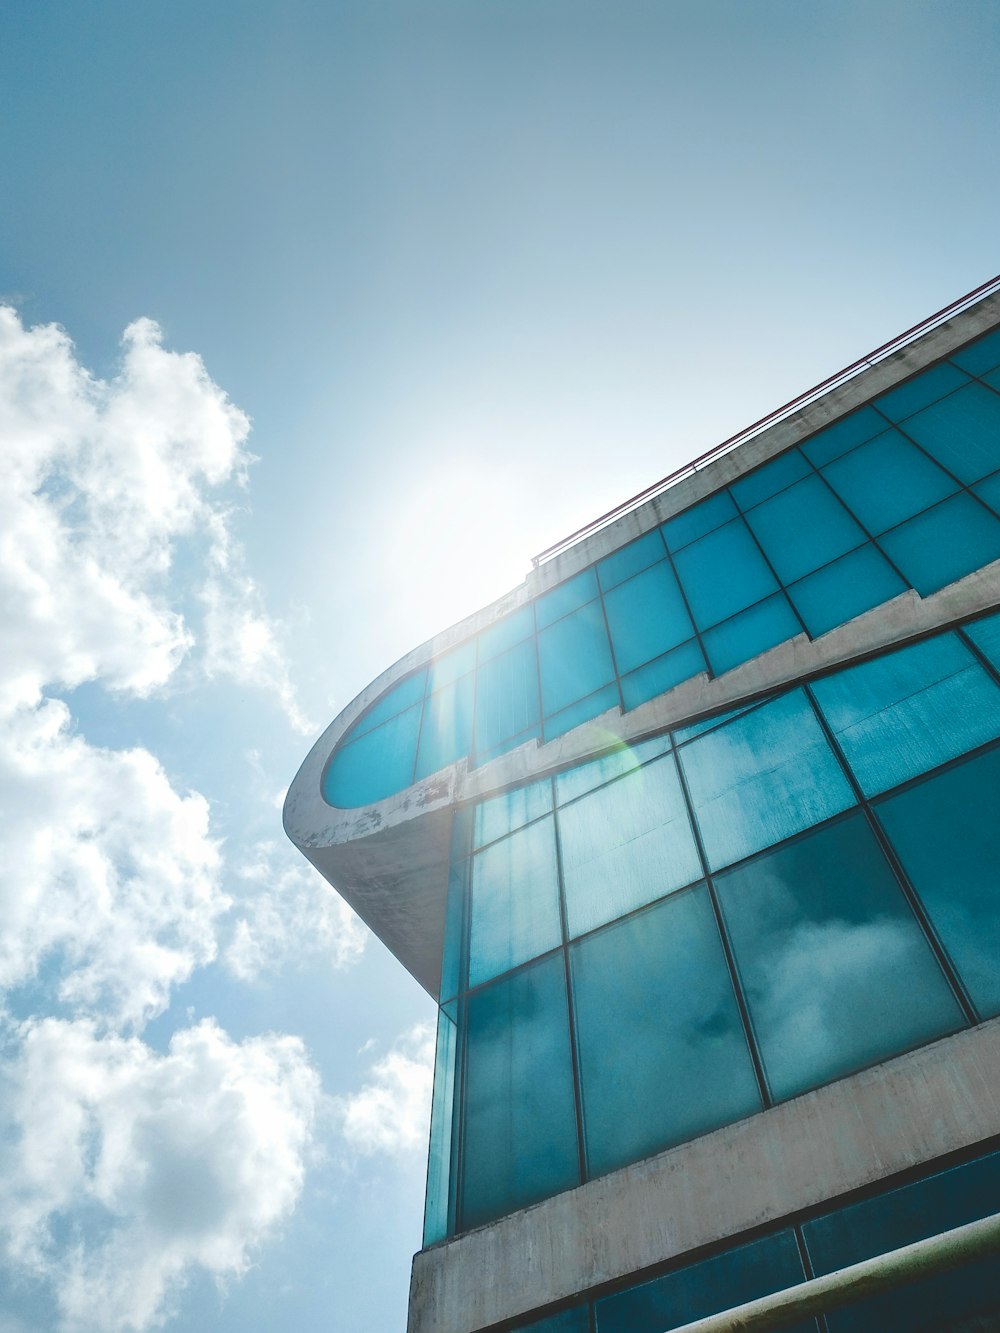 blue glass walled building under white clouds and blue sky during daytime